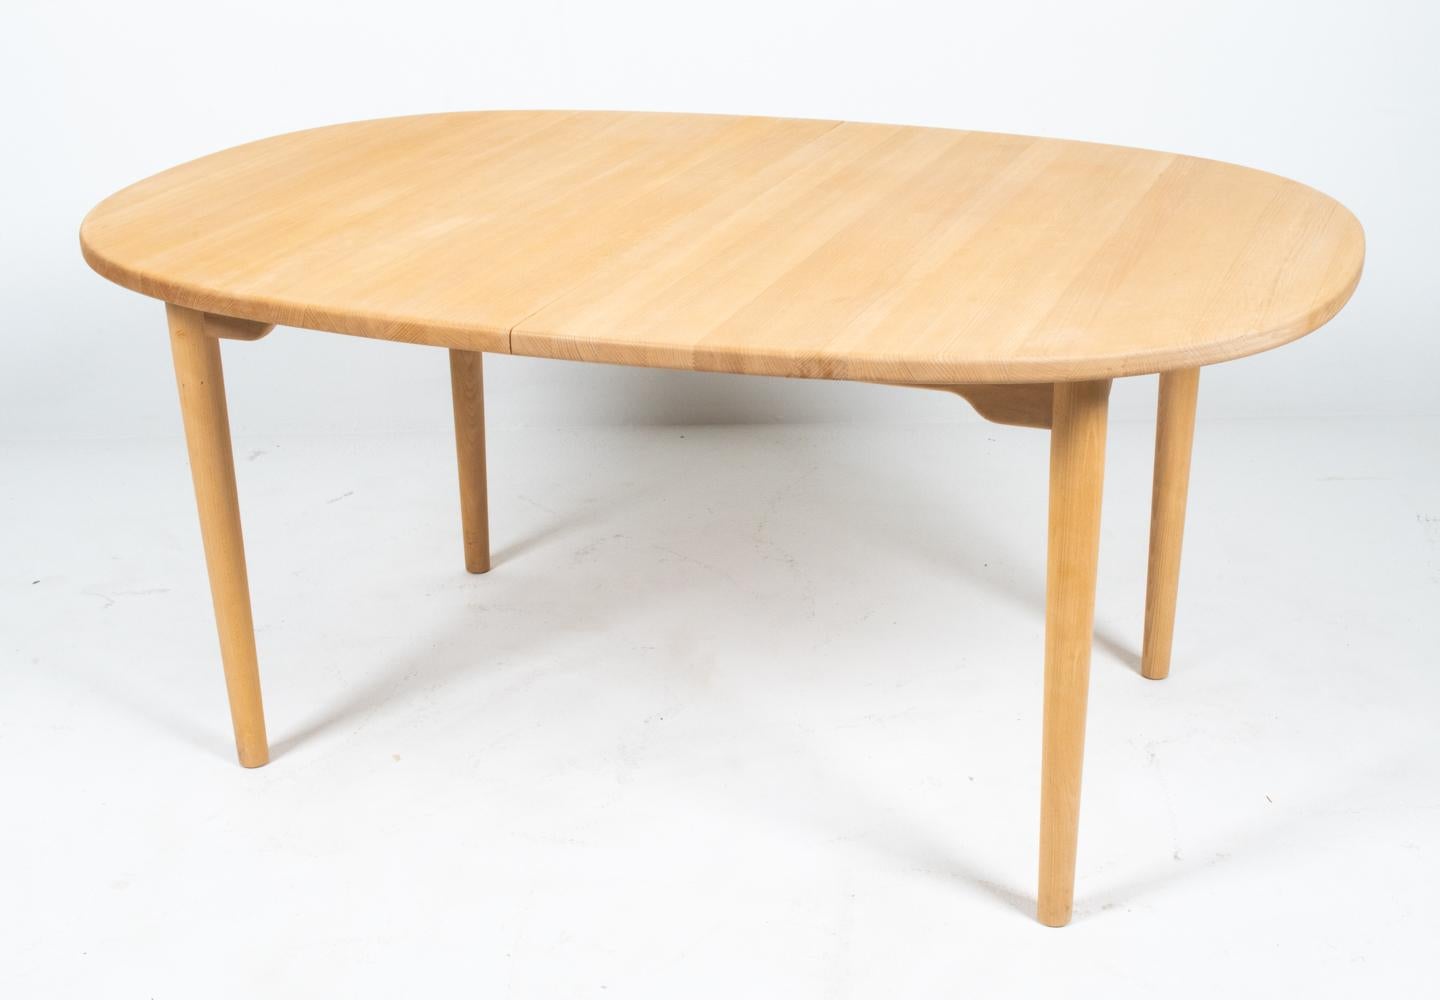 Epitomizing the defining principle of Scandinavian mid-century design, the seamless melding of purposeful utilitarian usage and typically sleek minimalist style, this dining table features an attractively simple top with rounded corners and chic